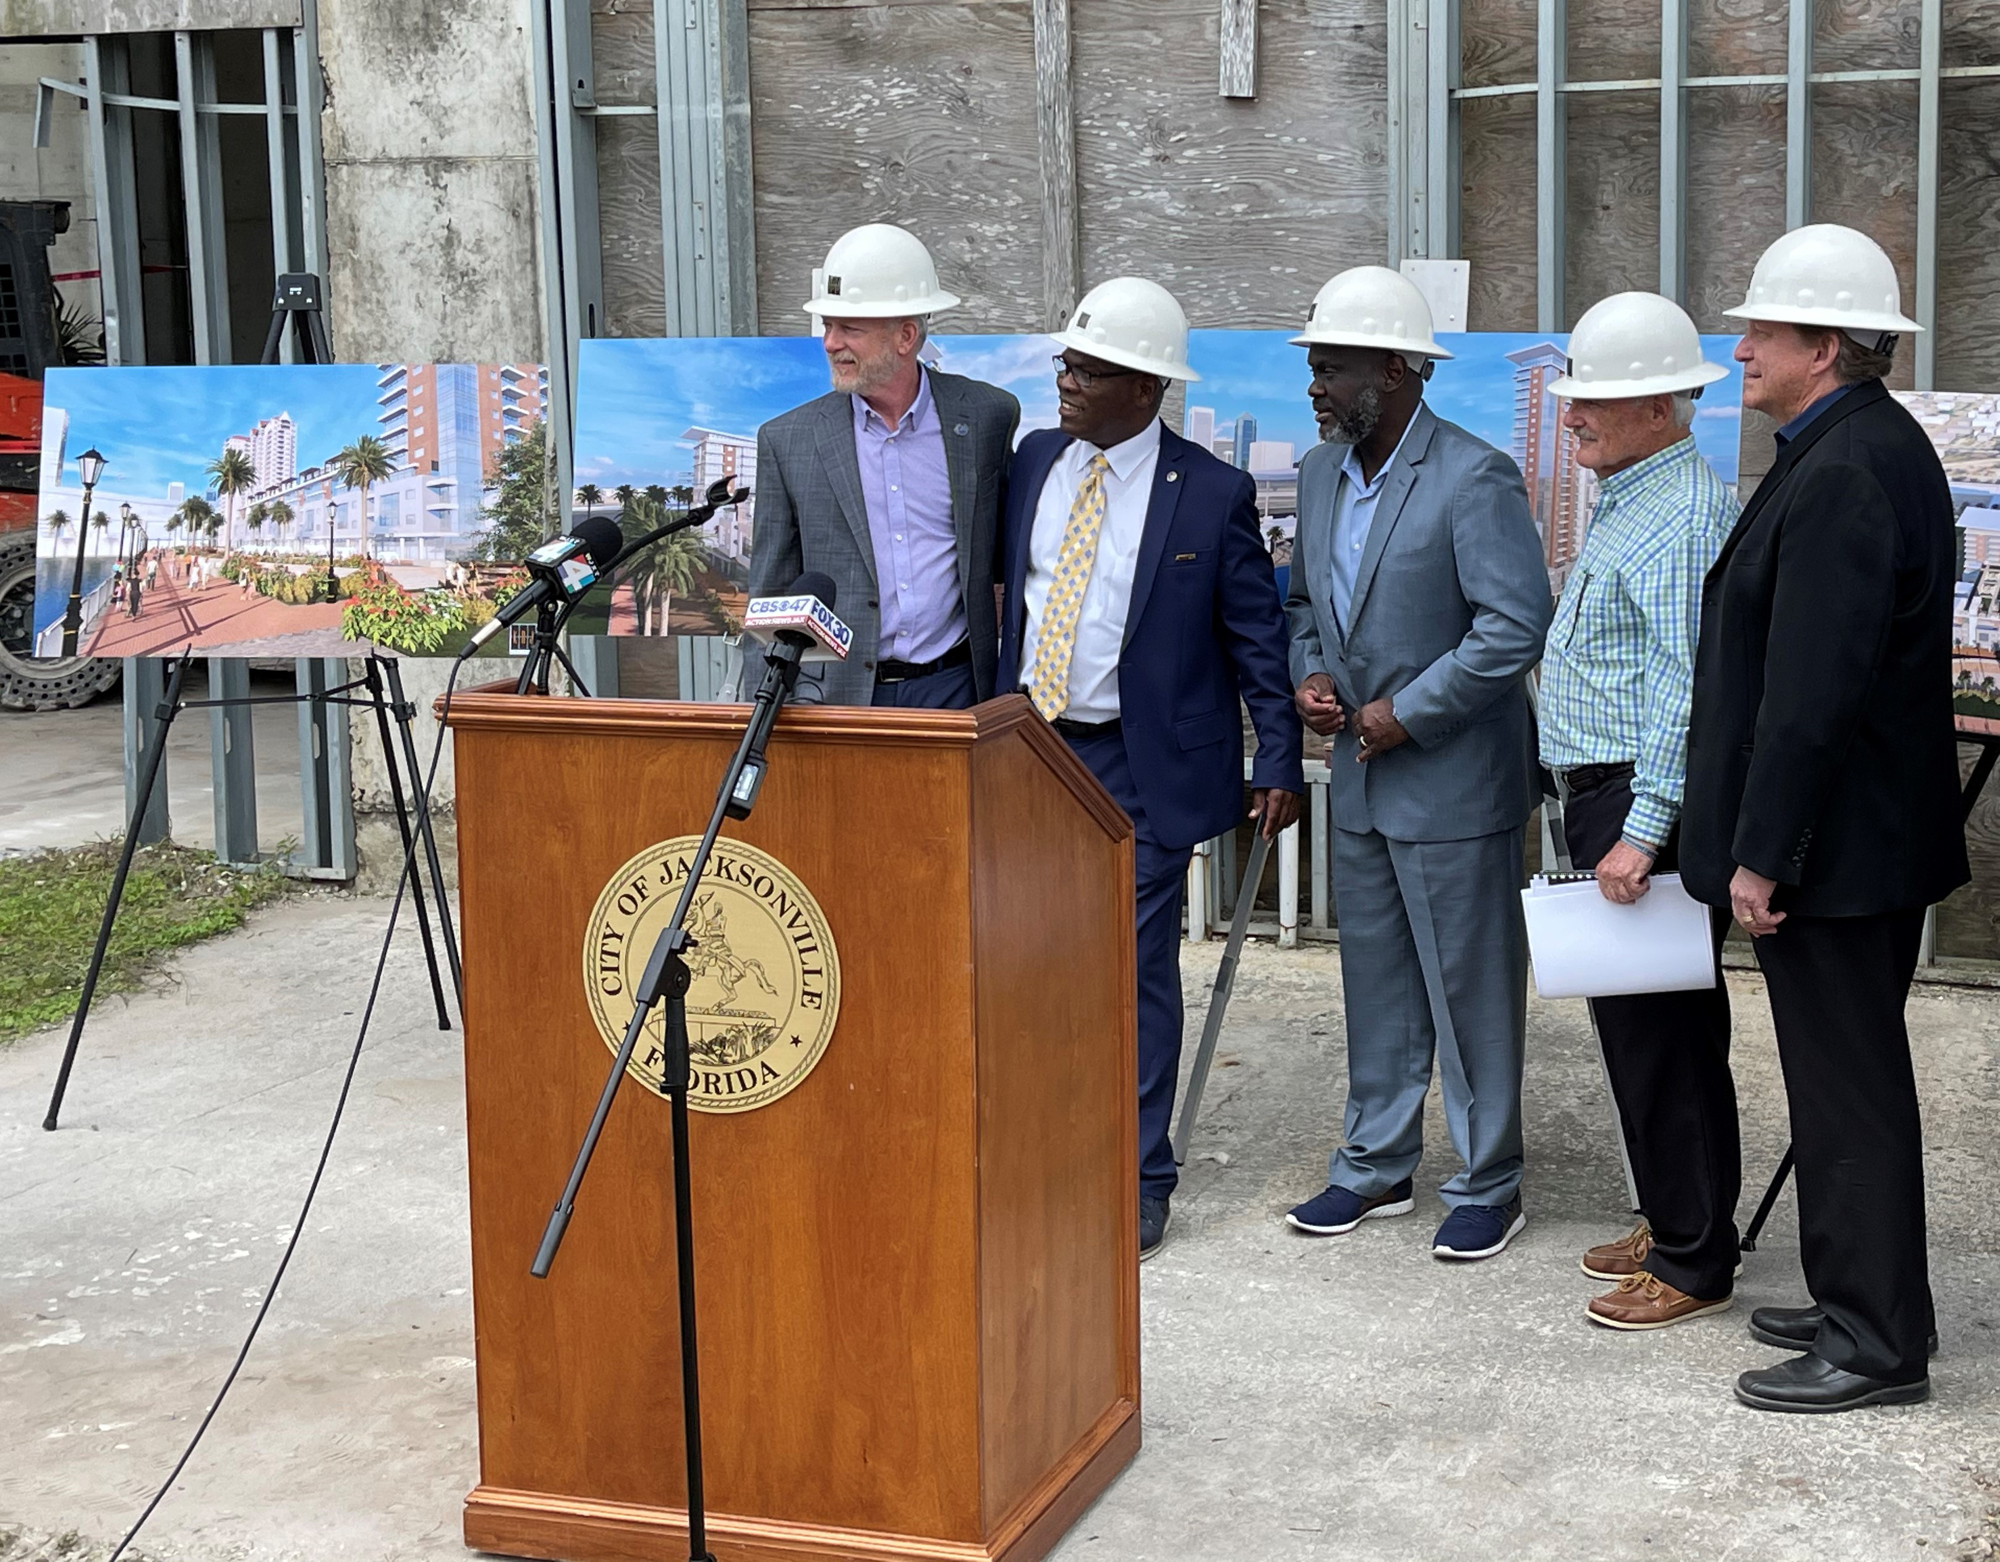 From left, City Council members Aaron Bowman and Reggie Gaffney; Council Vice President Sam Newby; Jacksonville Riverfront Revitalization co-manager Park Beeler; and KBJ Architects owner Tom Rensing.